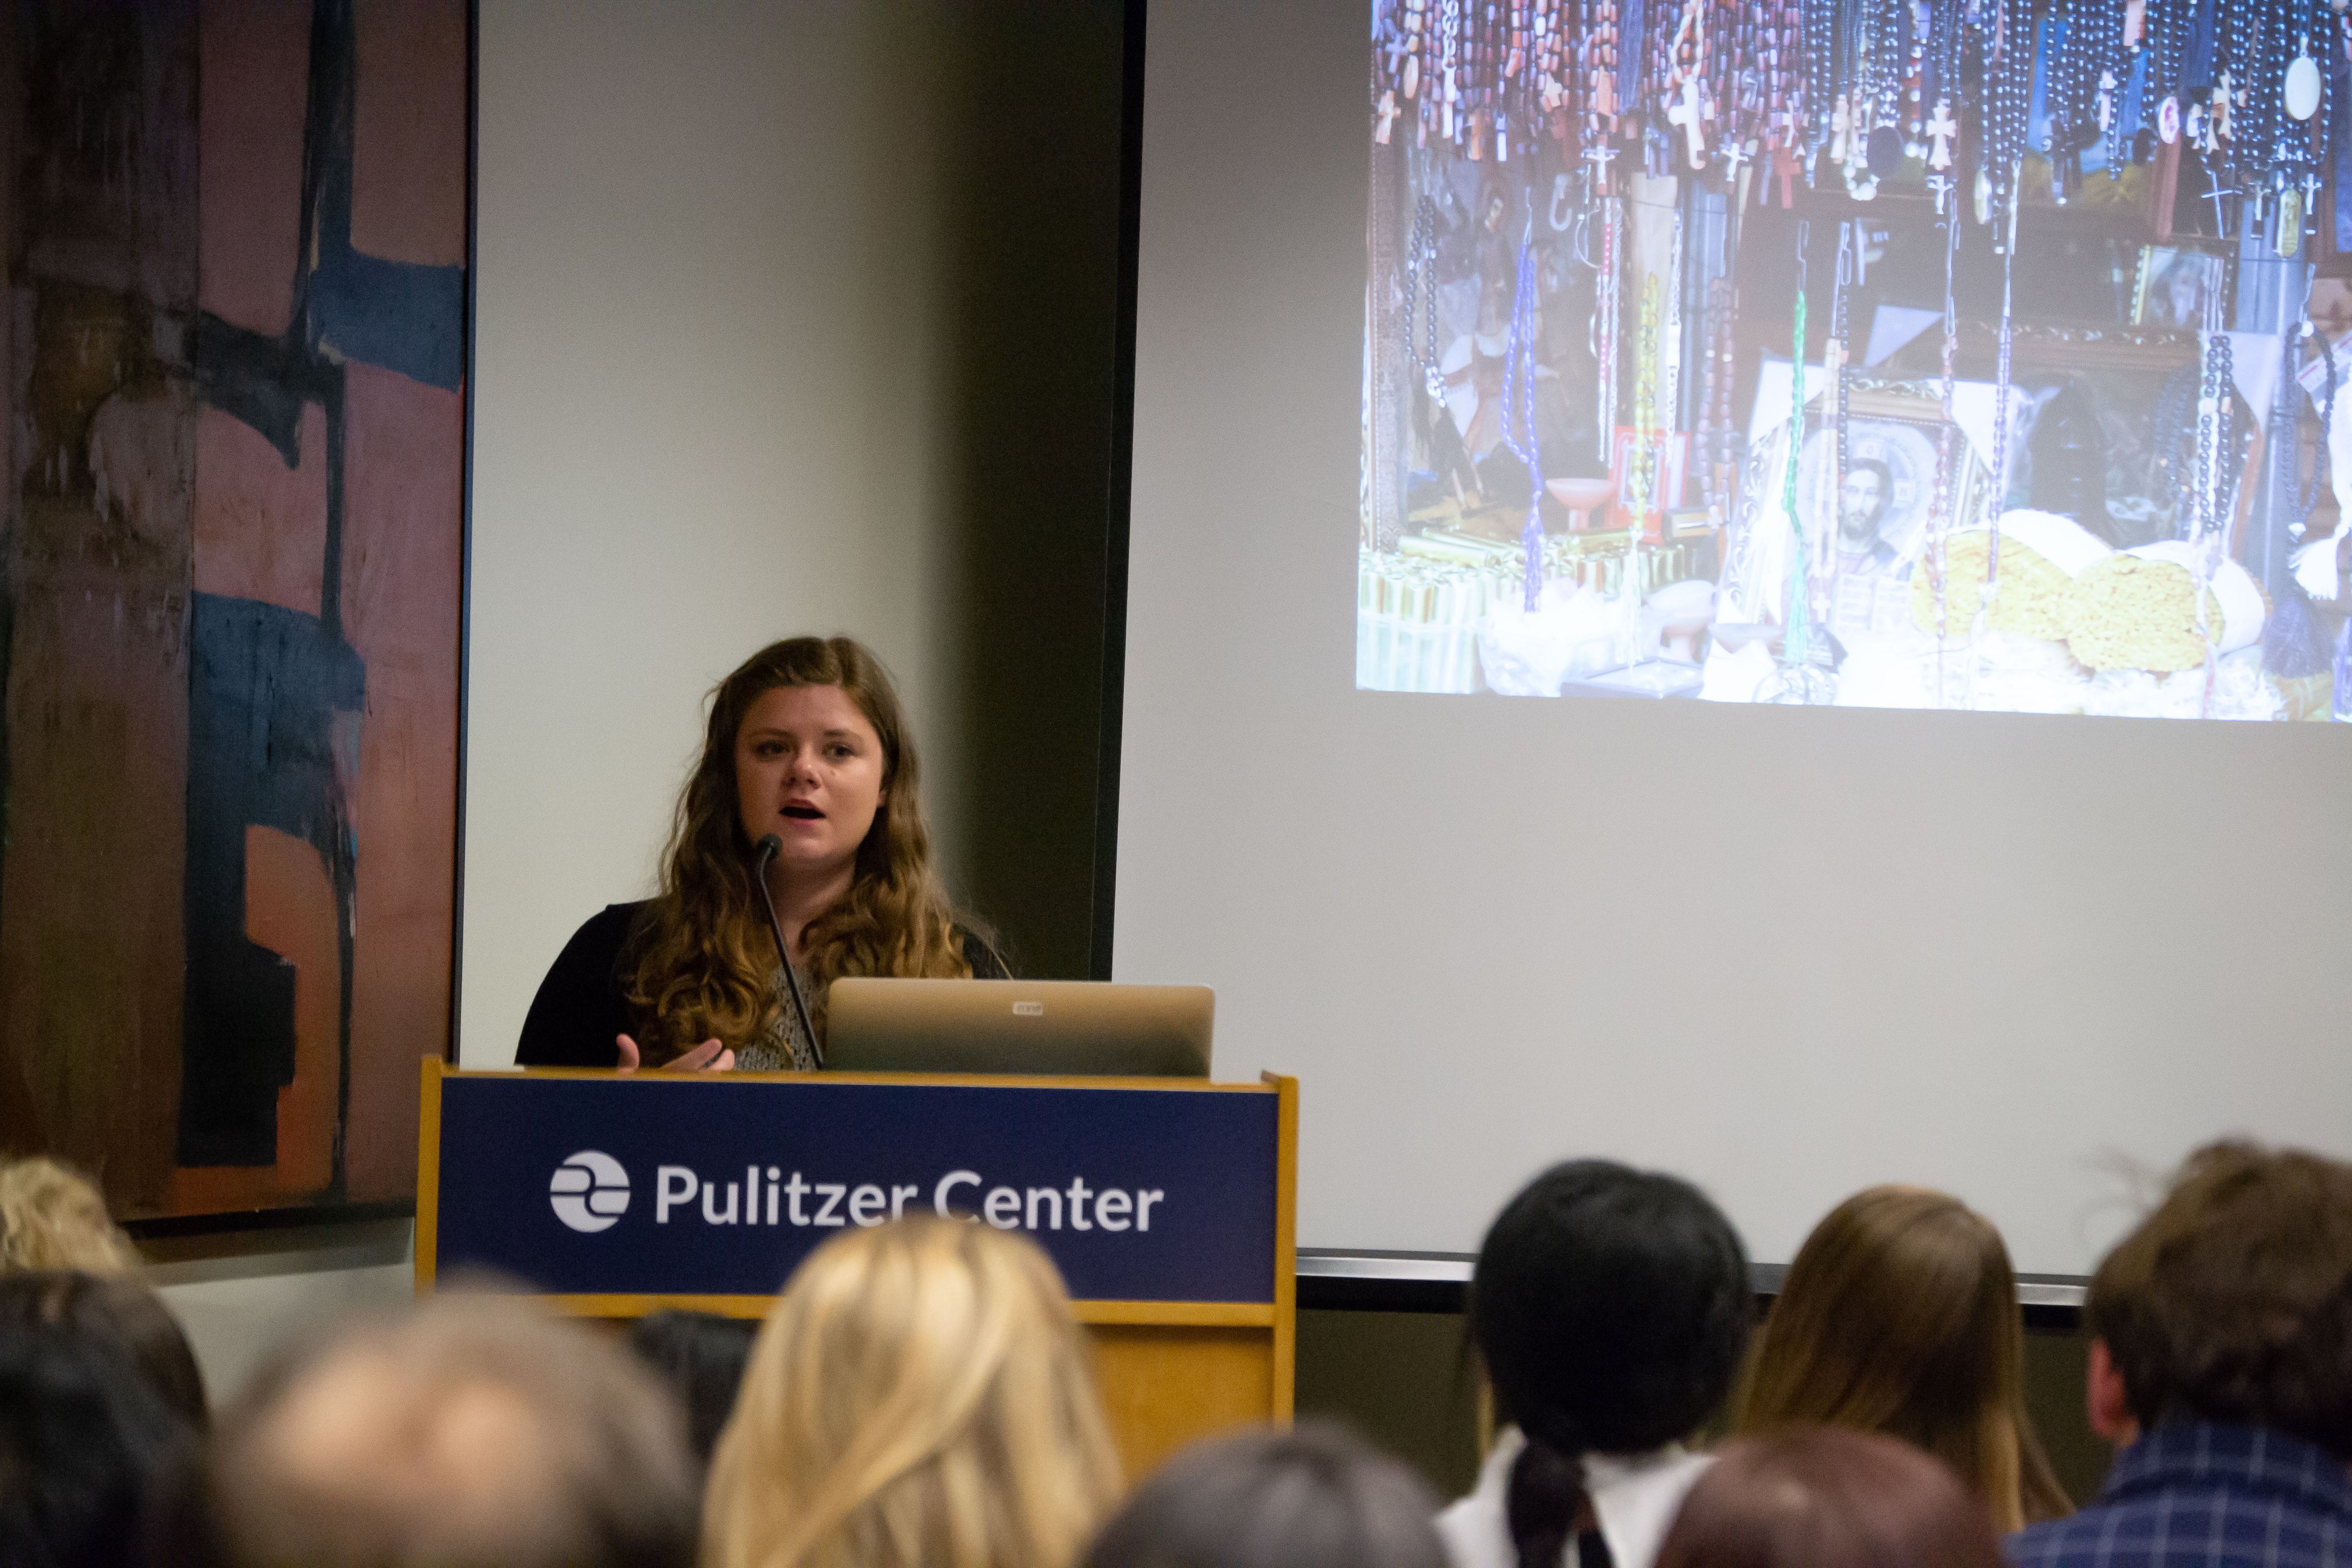 Kaitlyn Johnson (Georgetown University) presents findings from her project "Religion and Displacement in the Republic of Georgia" during the "Impact of Religion" panel on Day One of Washington Weekend. Image by Nora Moraga-Lewy. United States, 2019.